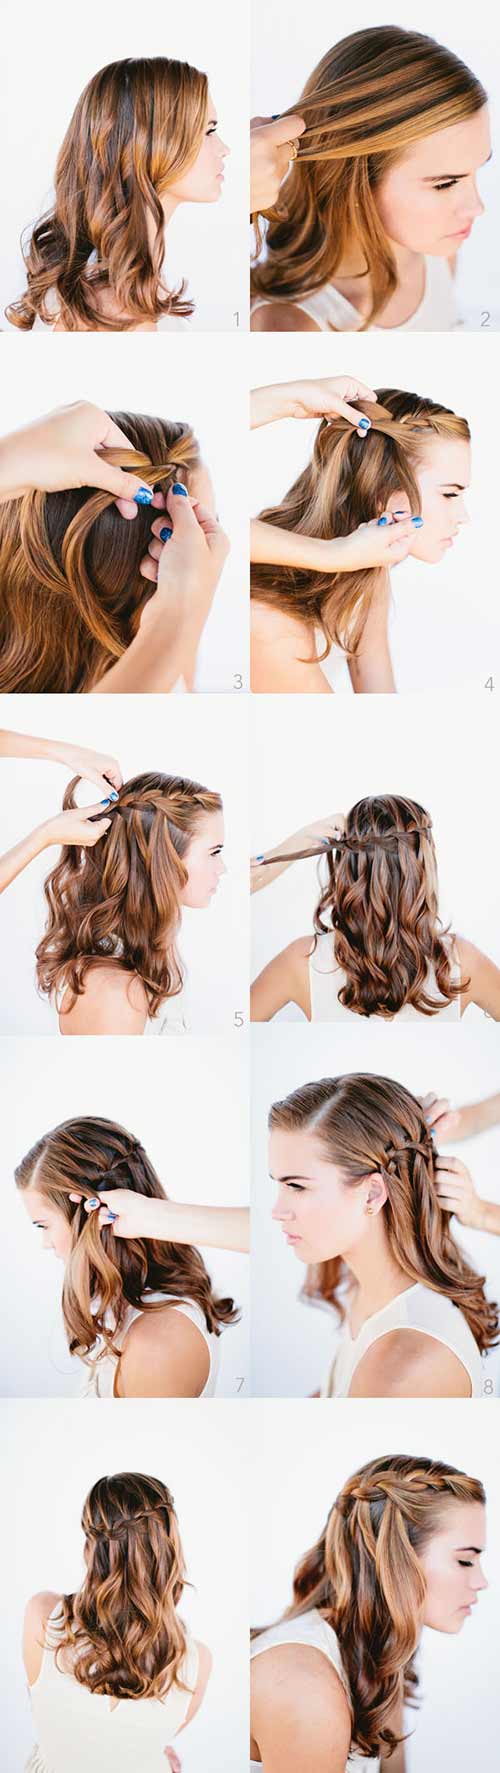 Waterfalls braids hairstyle for curly hair